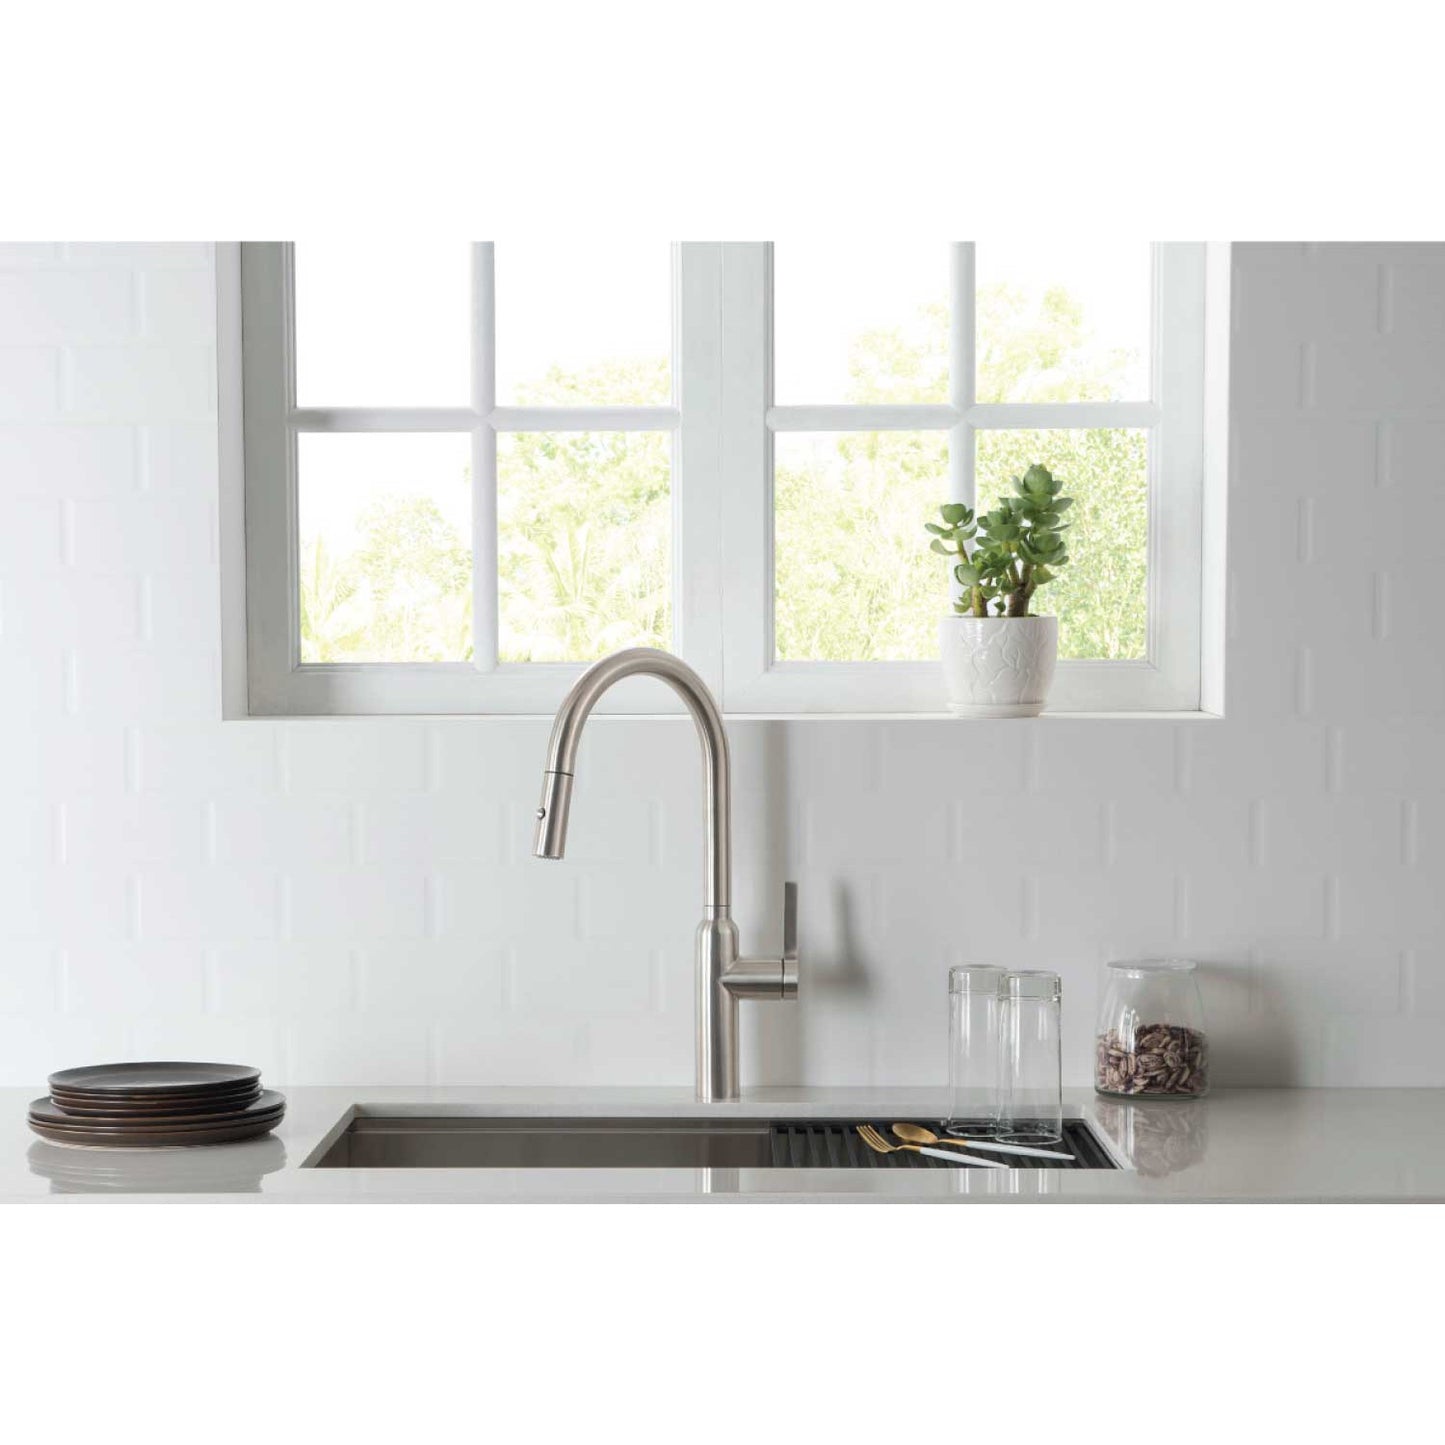 Isenberg Klassiker Ziel 17" Single Hole Army Green Stainless Steel Pull-Down Kitchen Faucet With Dual Function Sprayer